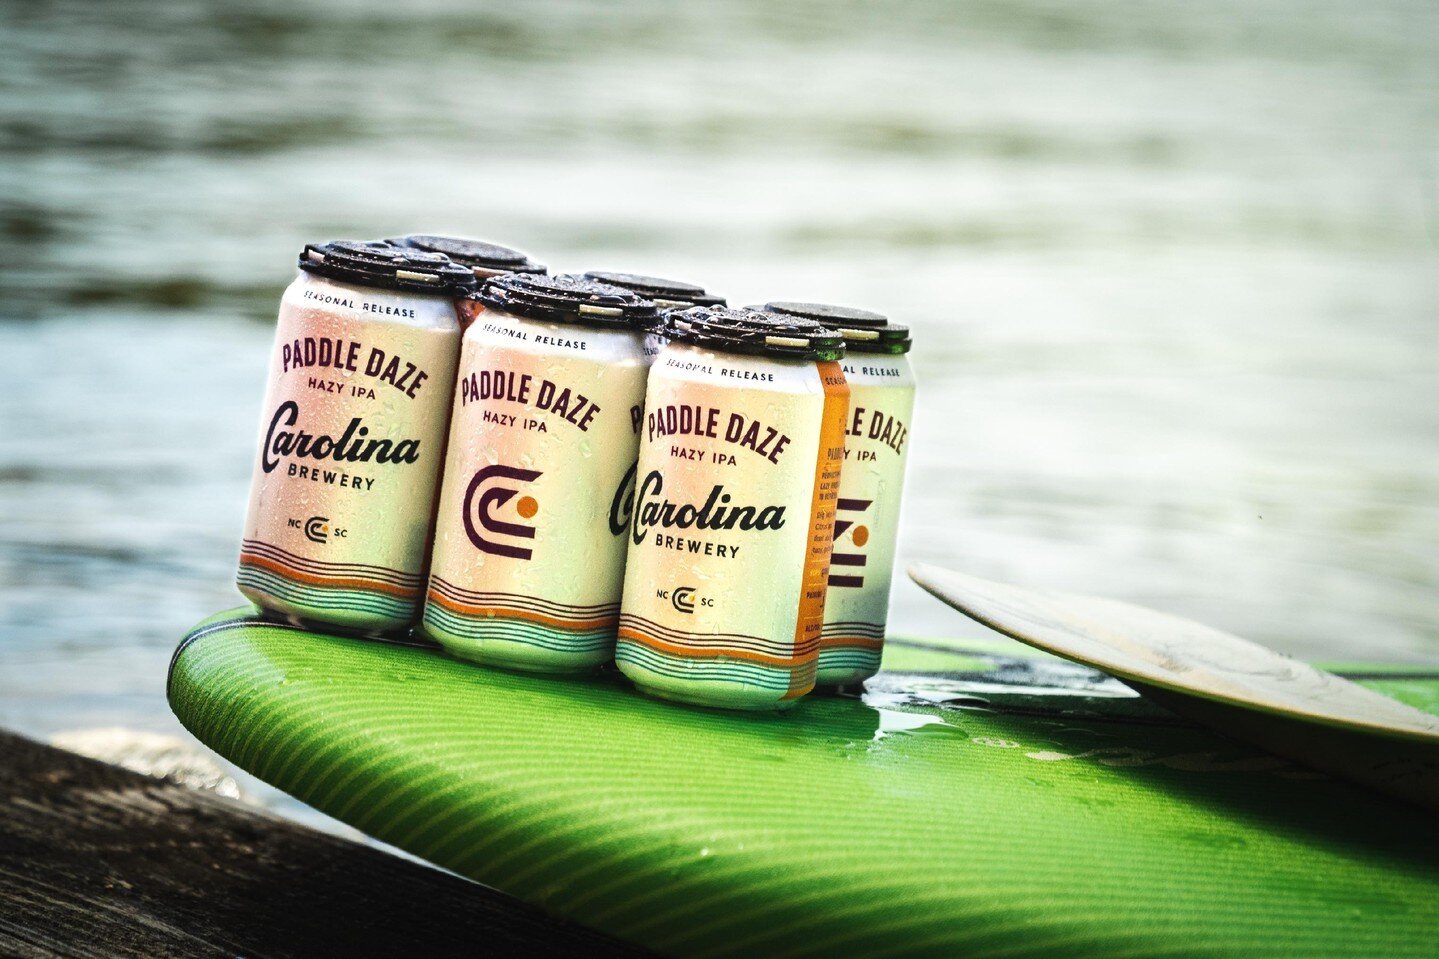 Perfect for rocky rapids, lazy rivers and everything in between. Who's In? 🛶

Pick up a six pack of Paddle Daze Hazy IPA for your next Carolina Adventure.  Find it near you! Link in Bio.
.
.
. 
#beer #craftbeer #ncbeer #brewery #drinklocal #northcar